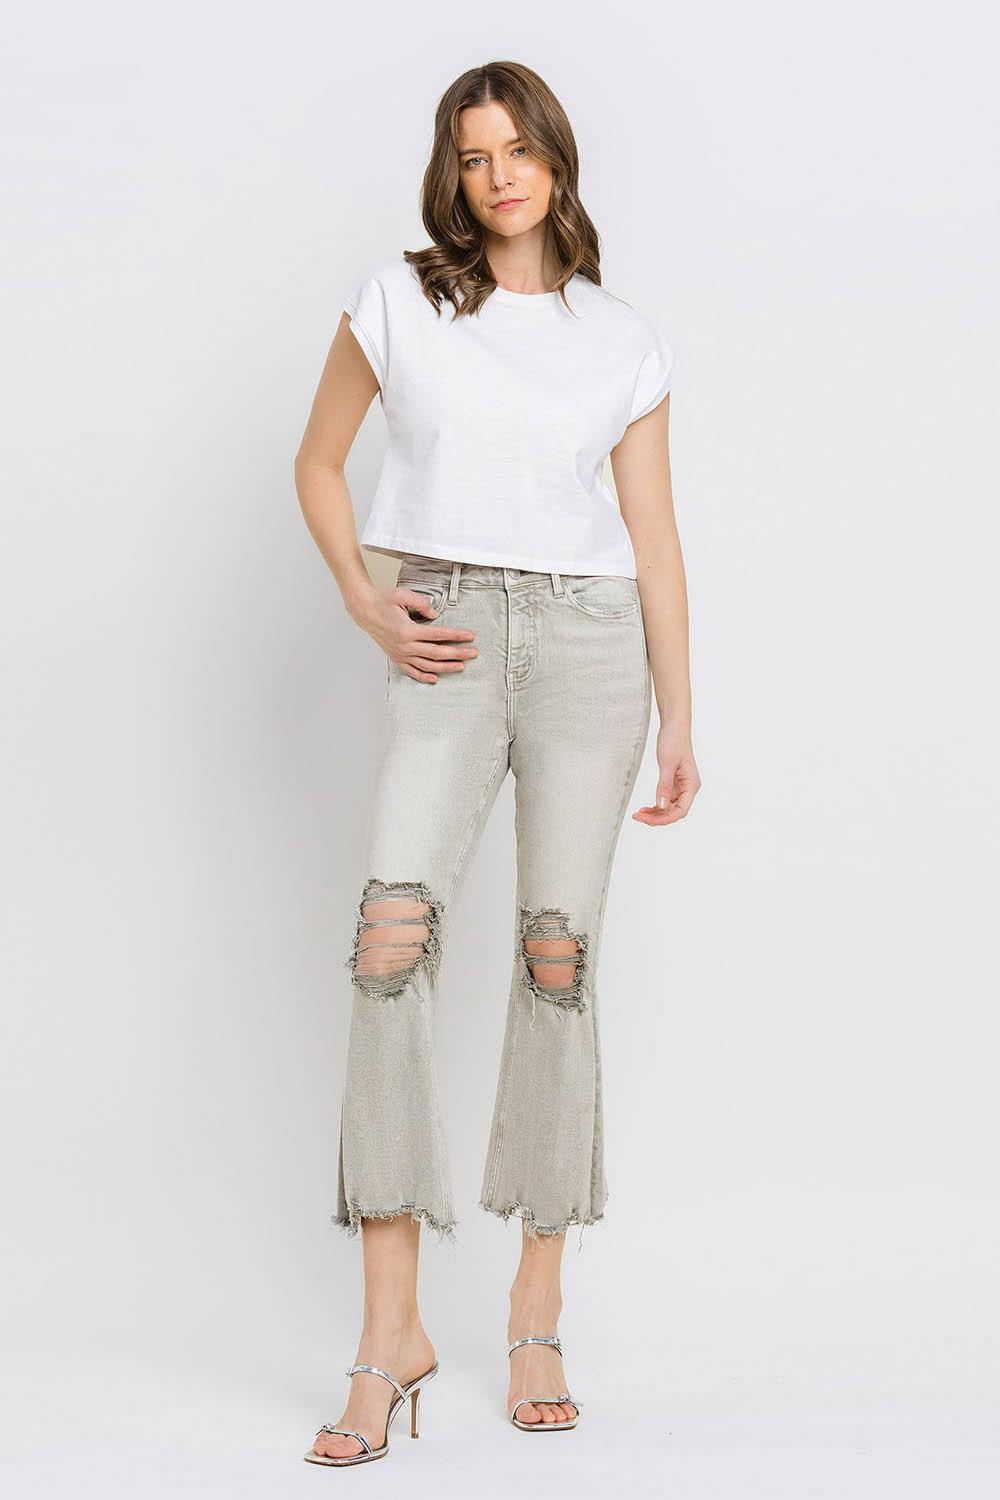 Lovervet Distressed Raw Hem Cropped Flare Jeans - Lucianne Boutique